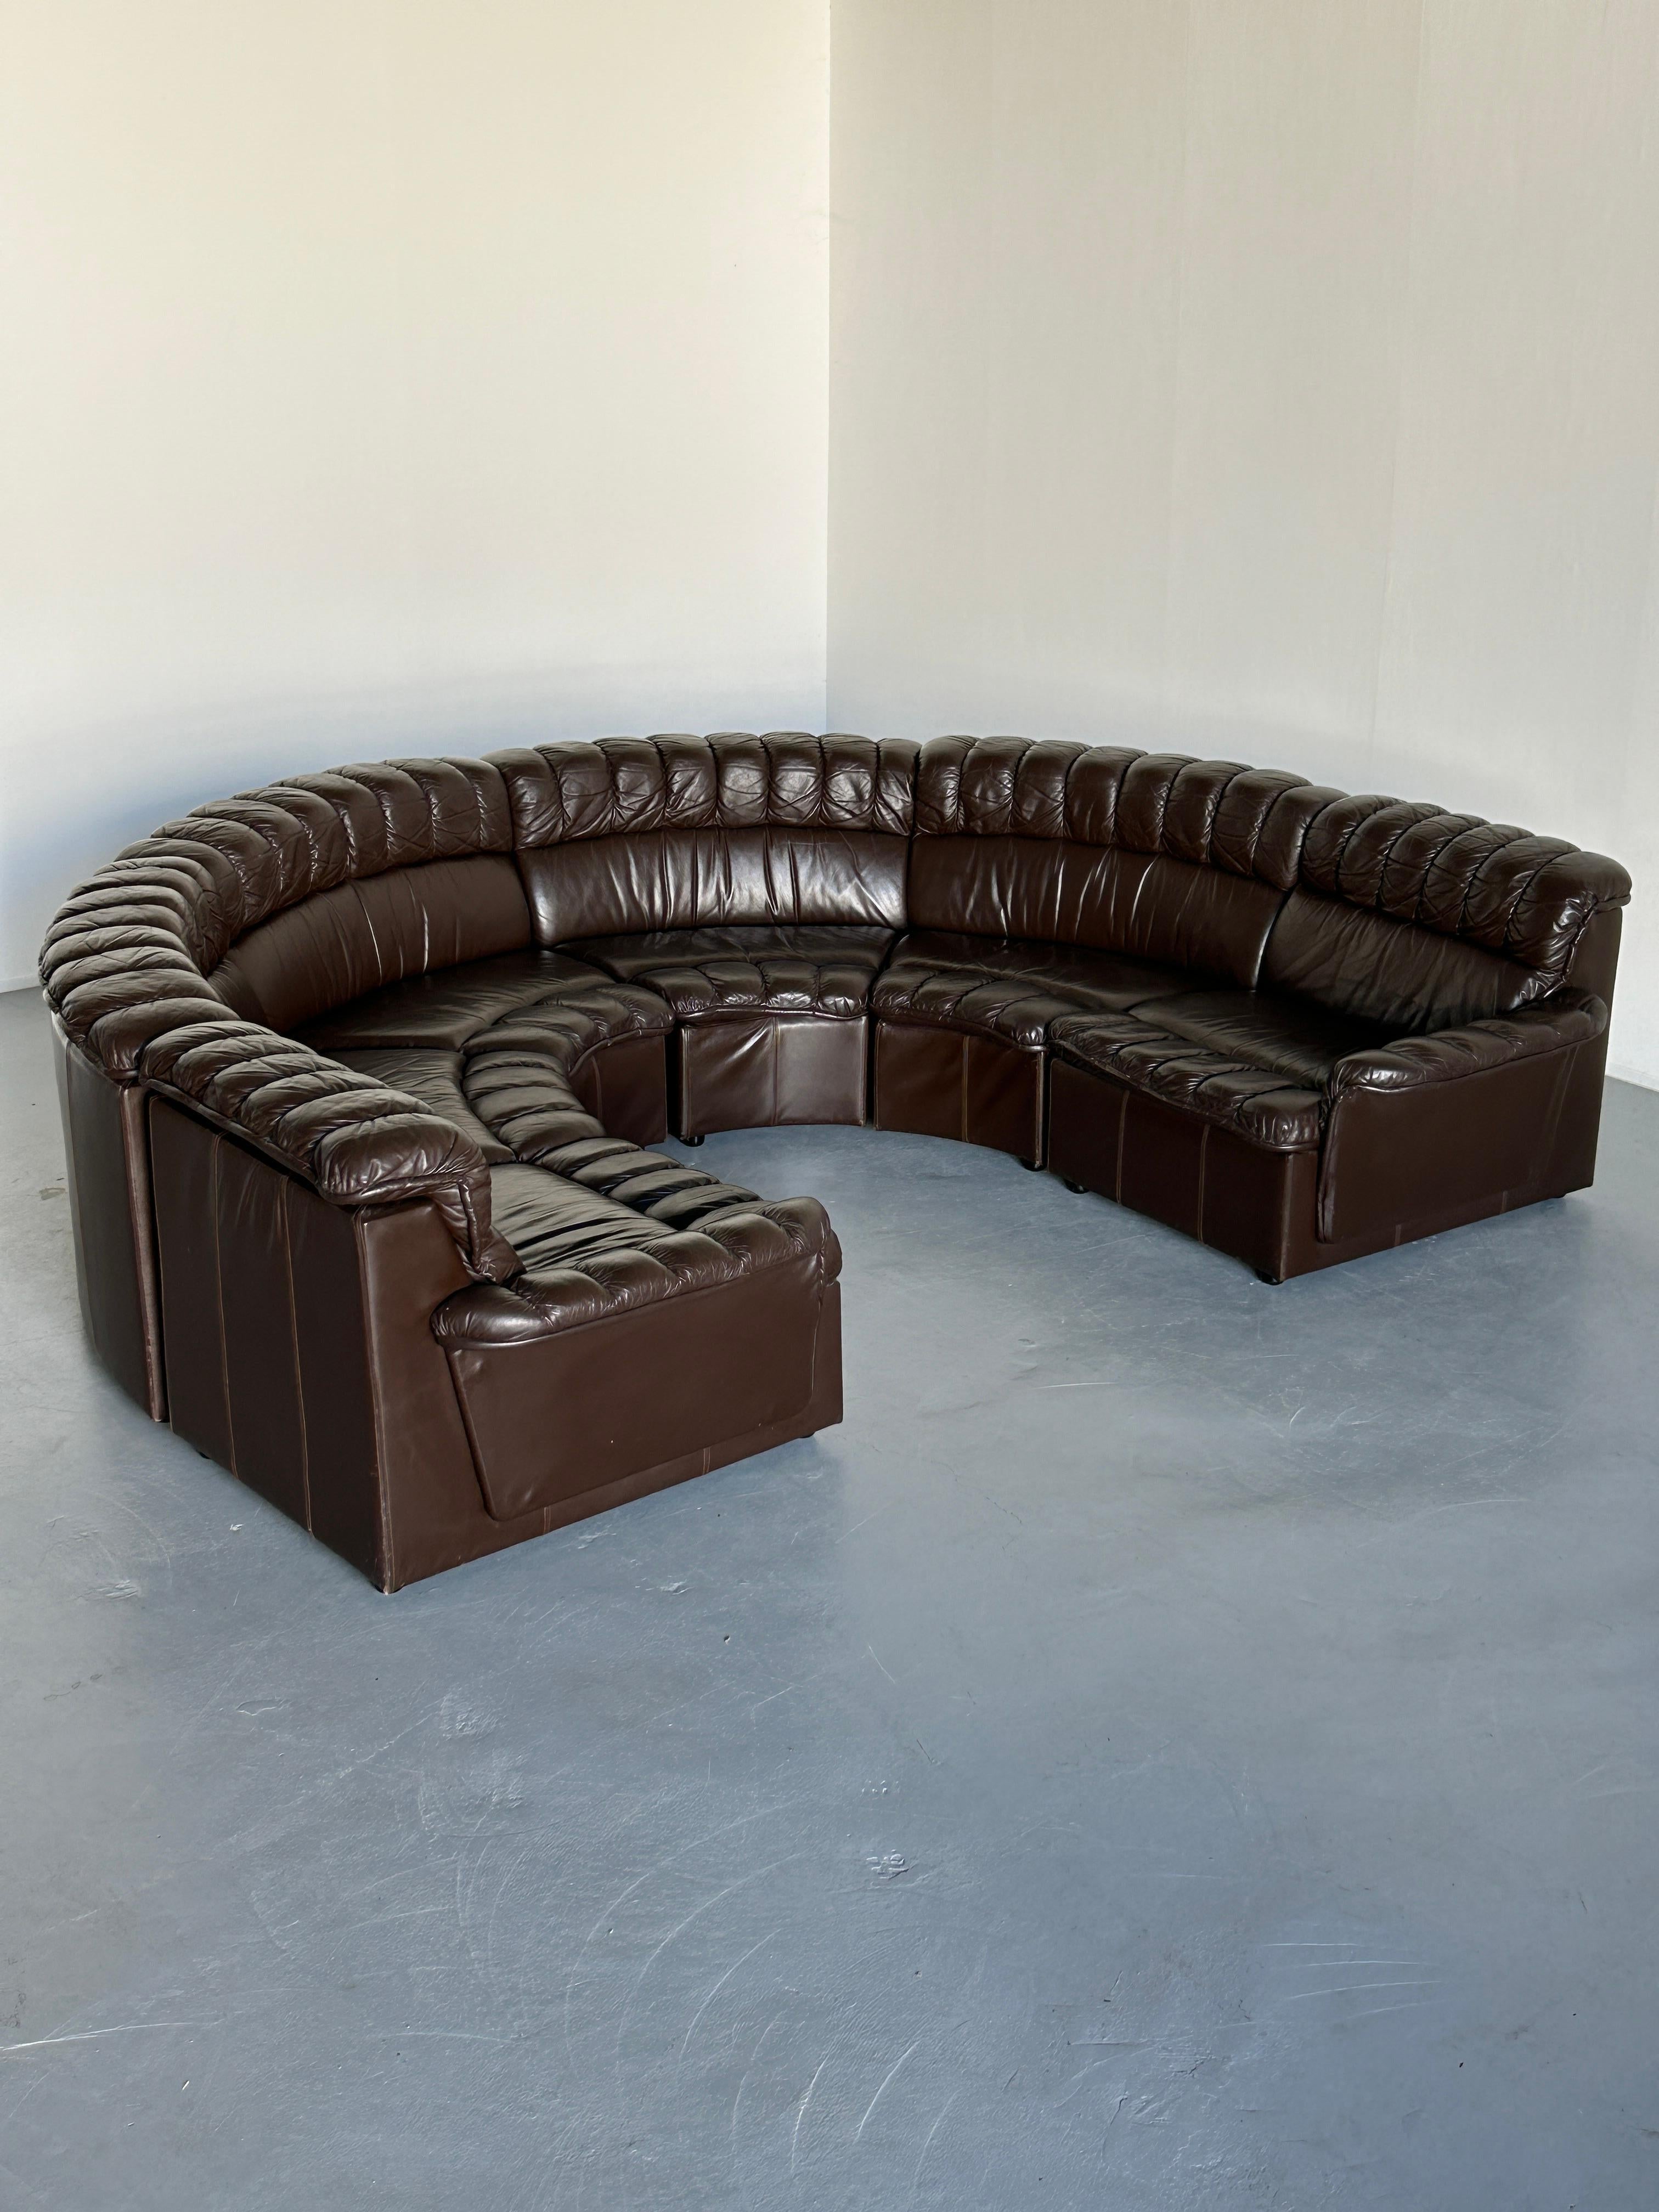 Mid-Century-Modern Leather Snake Sofa in style of De Sede DS-600 Non-Stop, 1970s For Sale 2